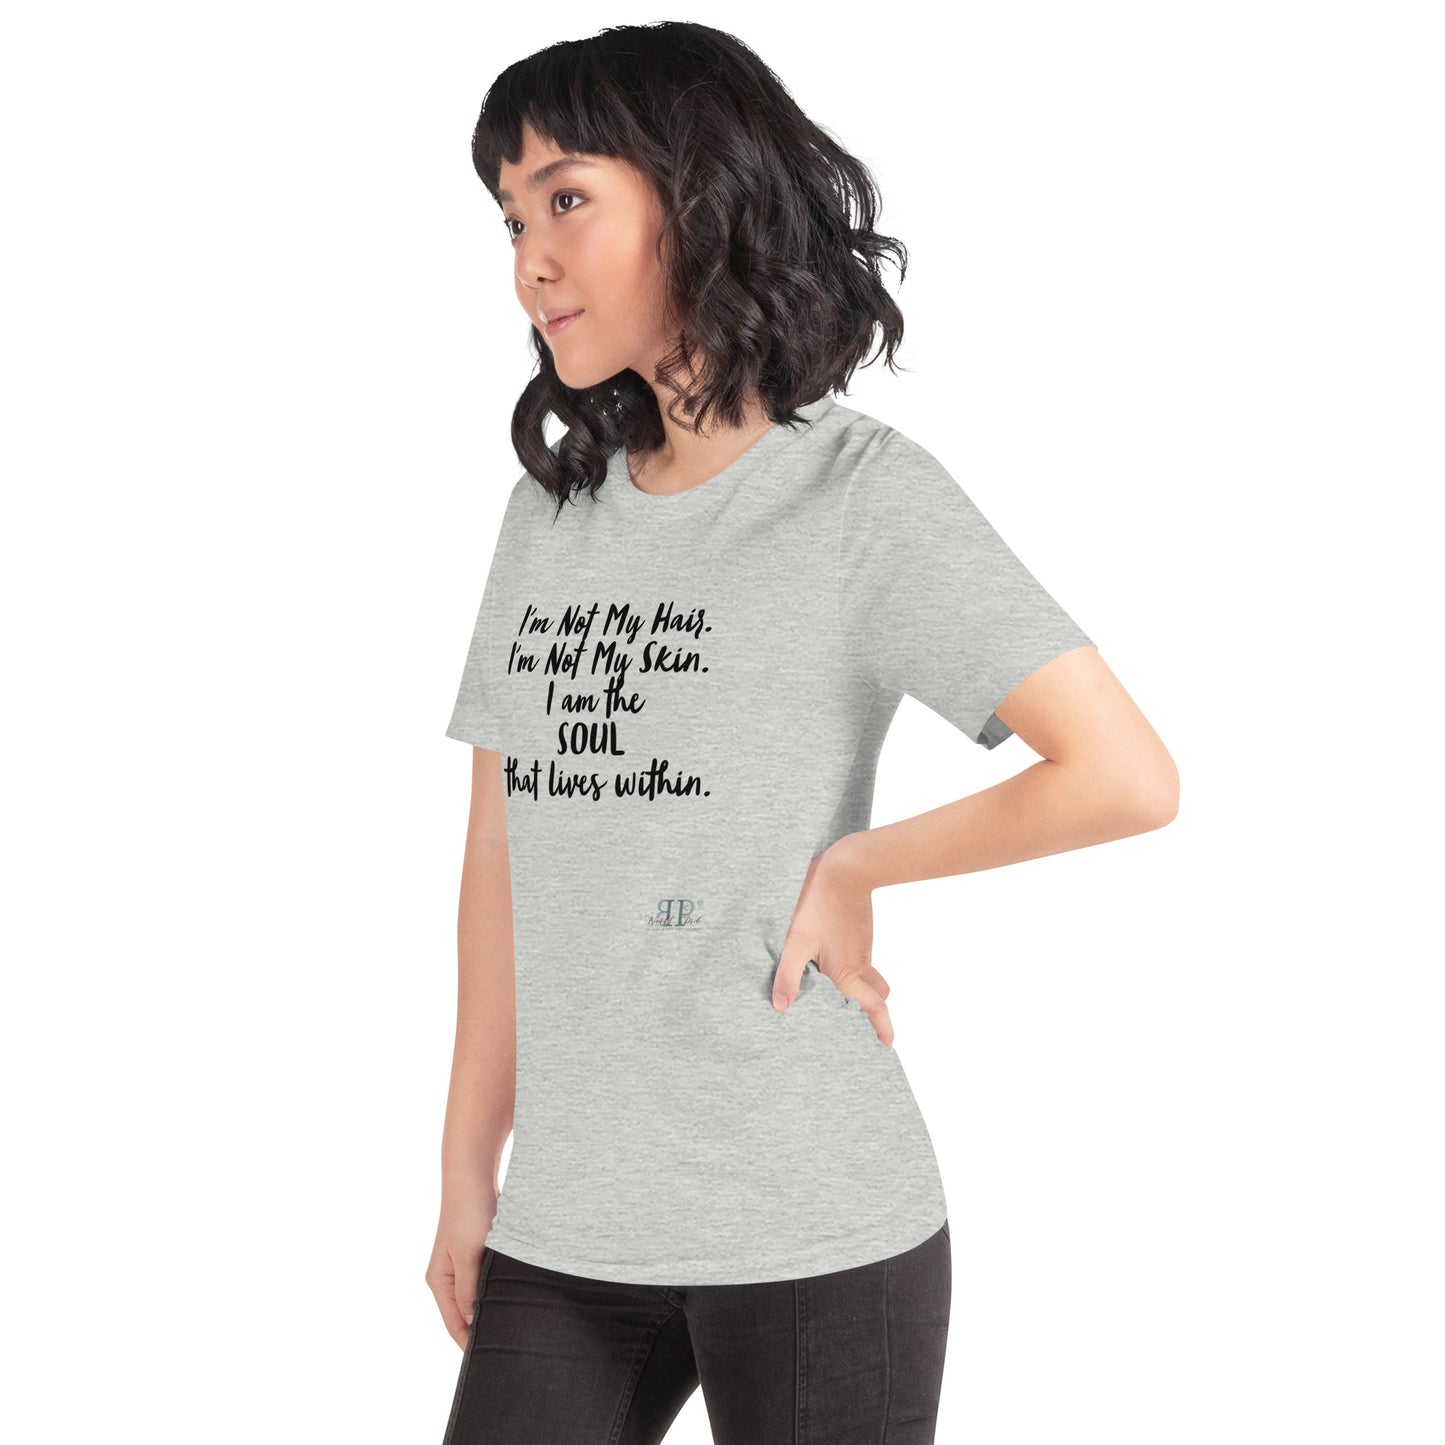 The SOUL That Lives Within Unisex T-Shirt- Black text